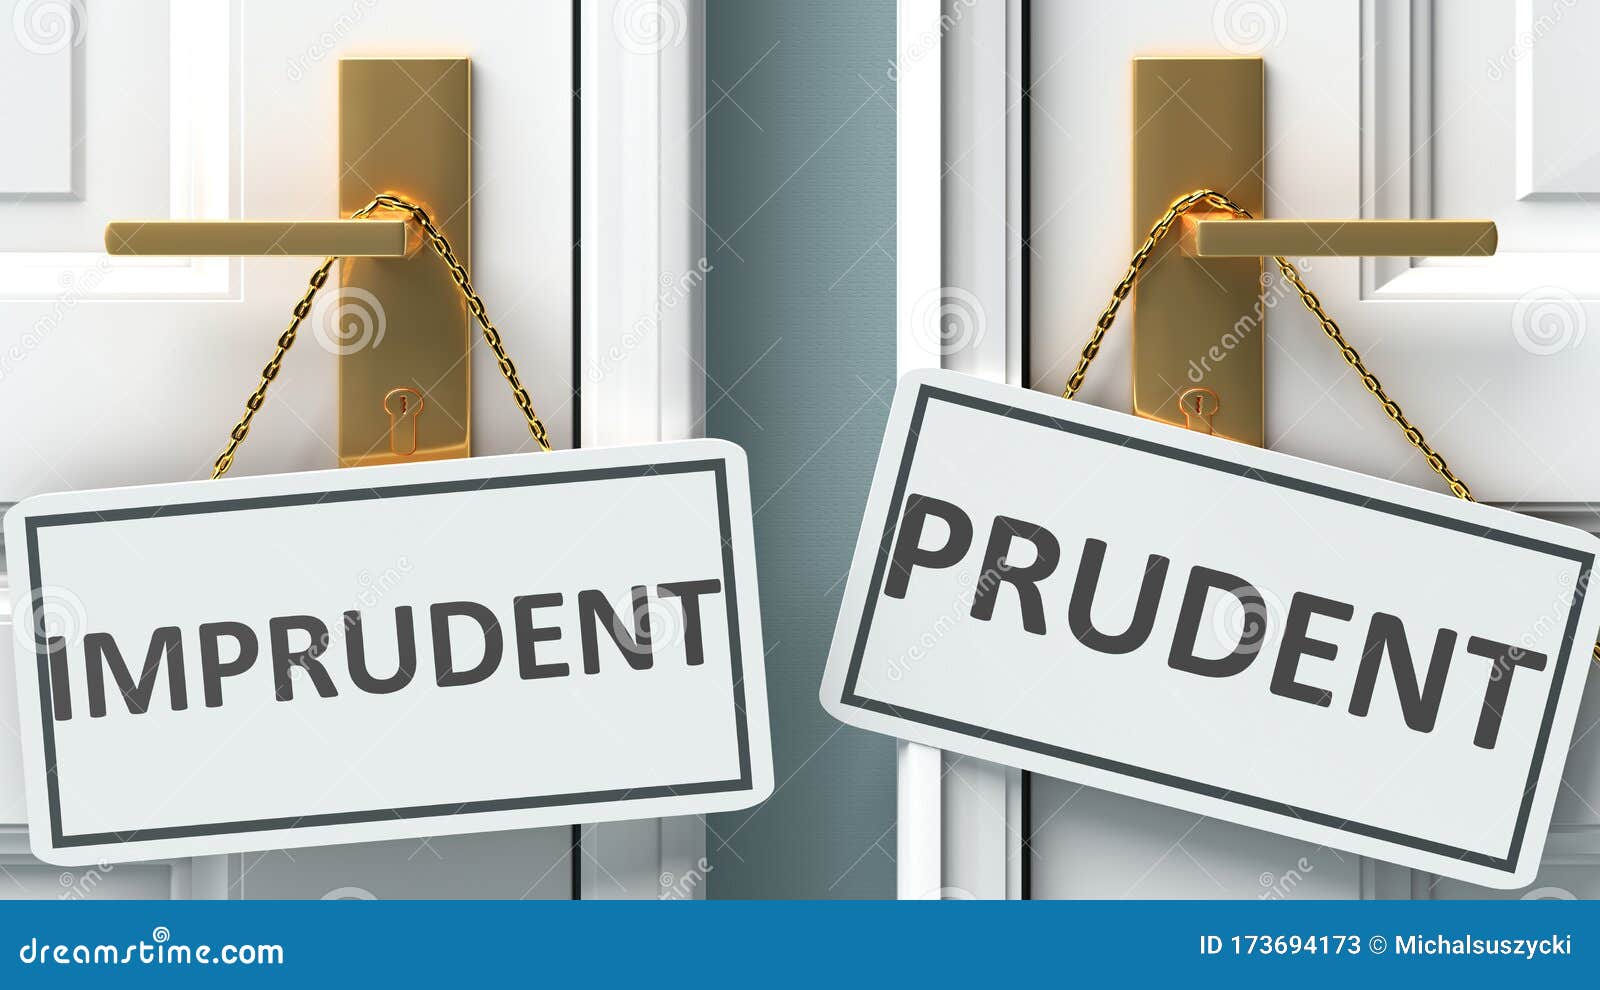 imprudent or prudent as a choice in life - pictured as words imprudent, prudent on doors to show that imprudent and prudent are